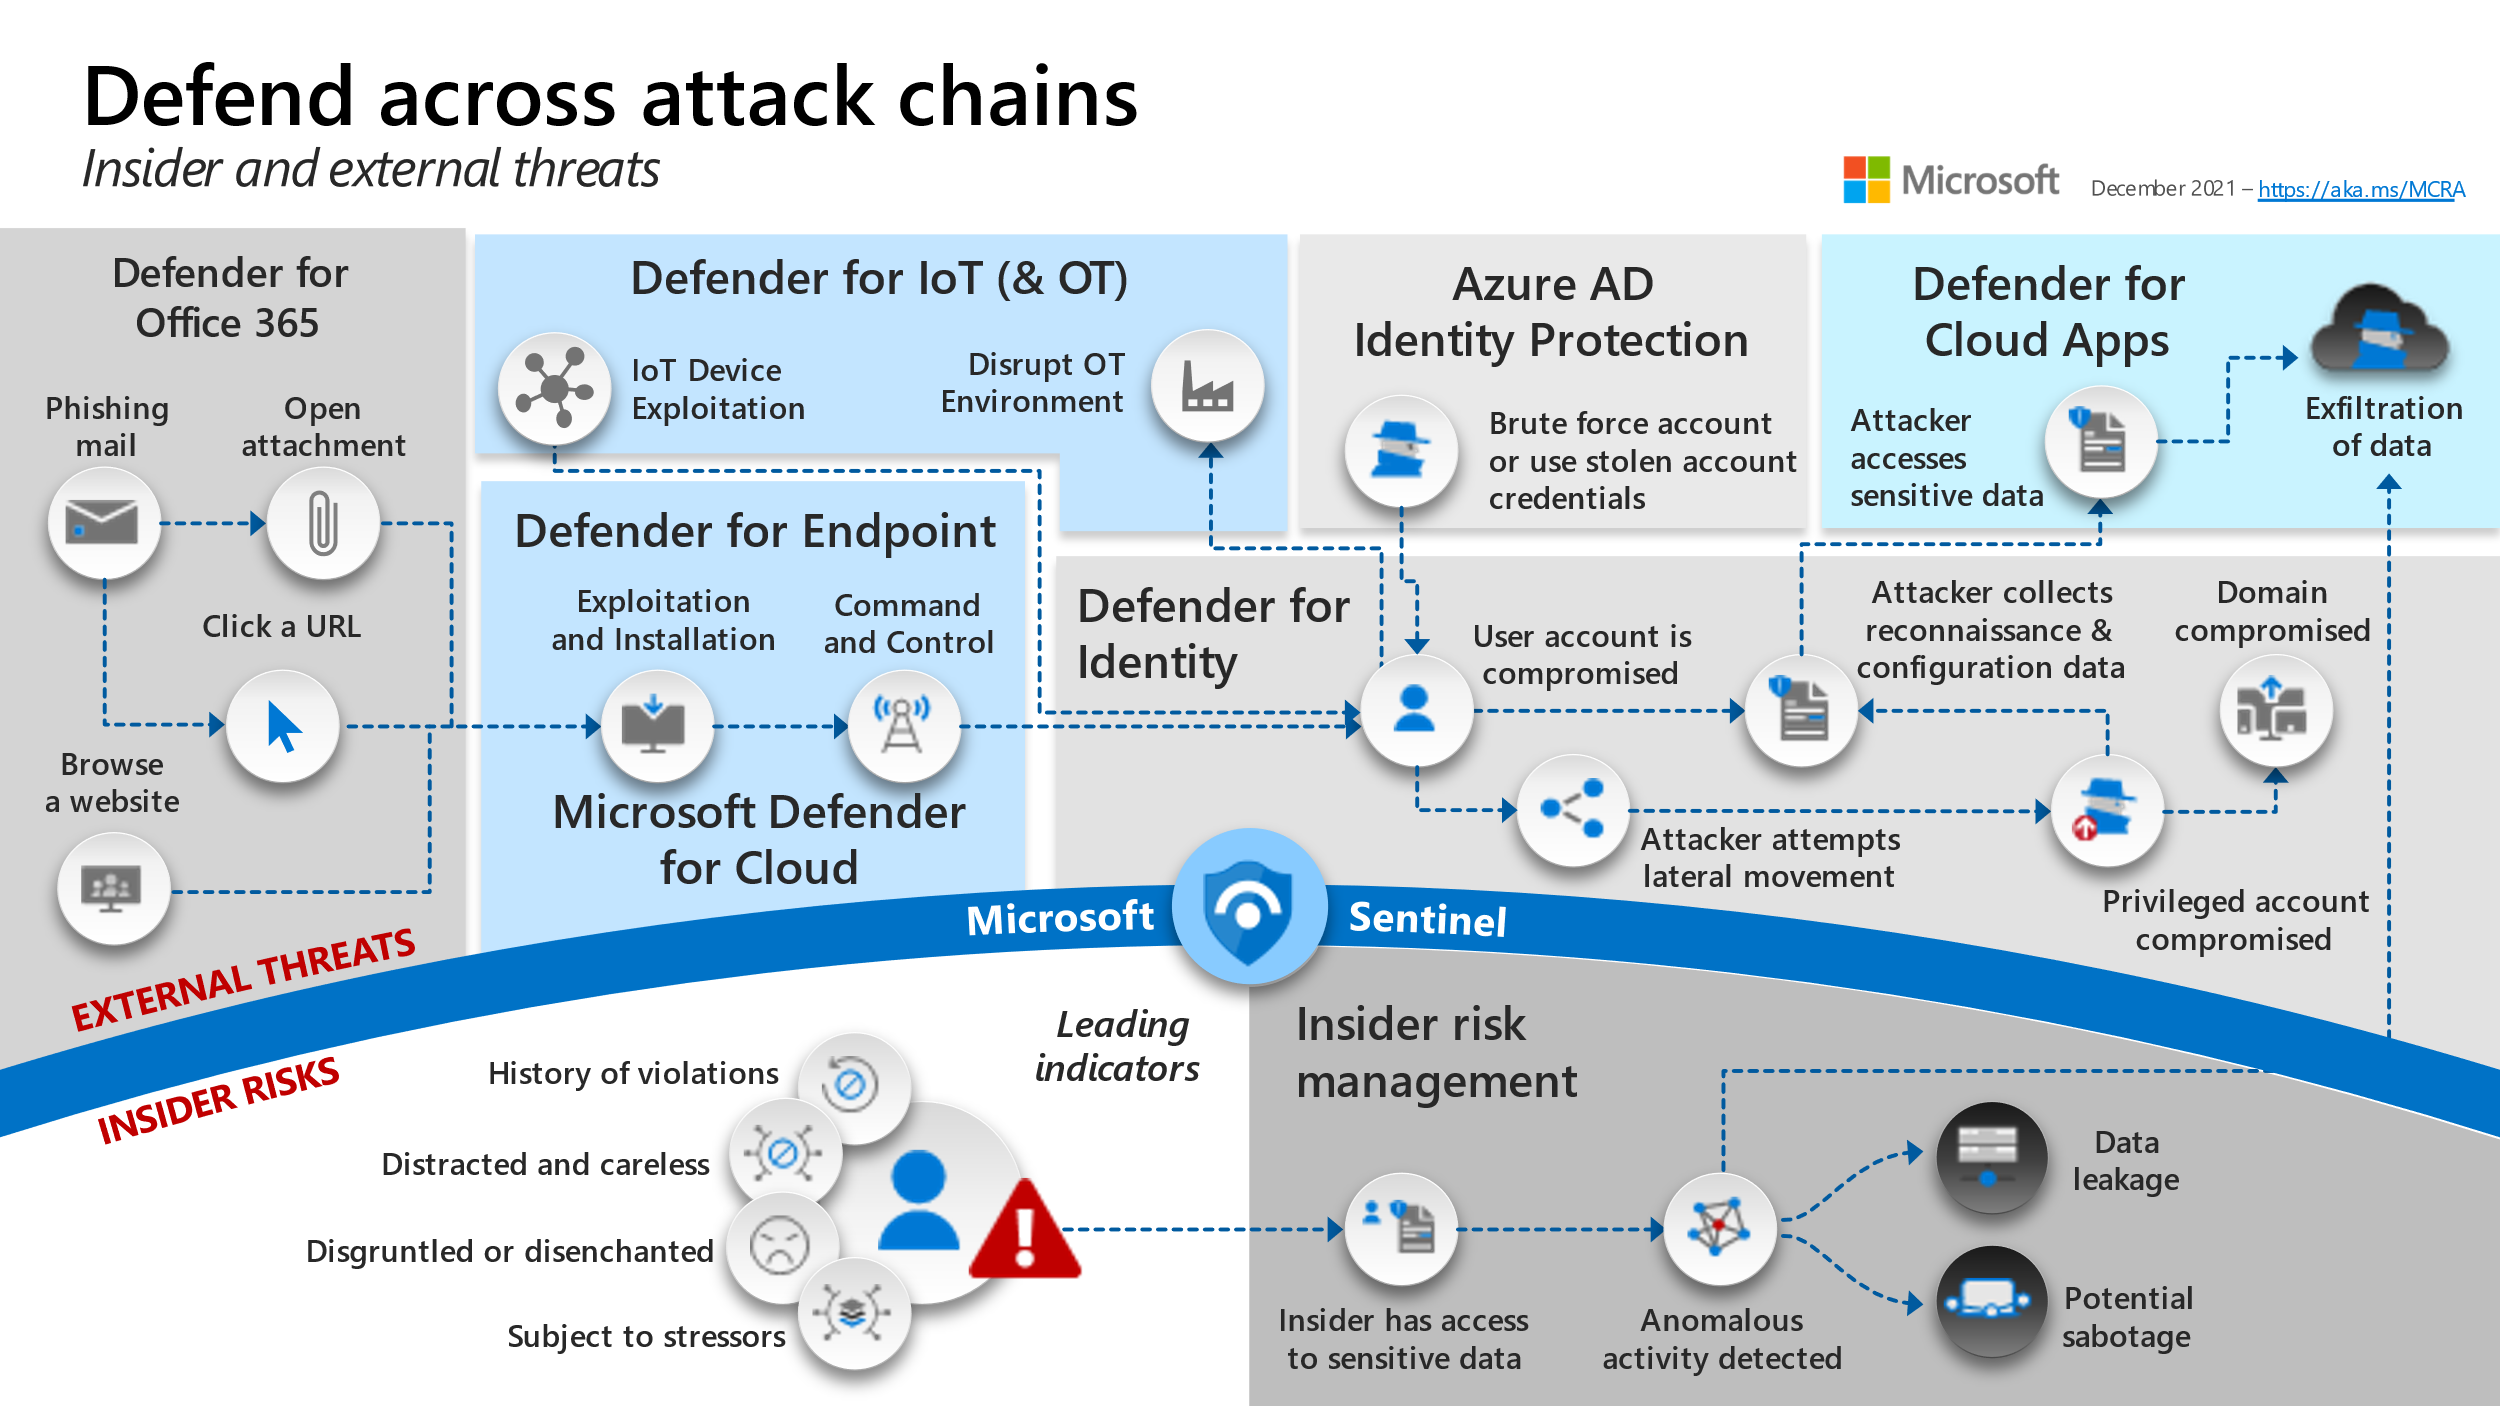 Diagram that shows how Defender for Cloud defends across attack chains.